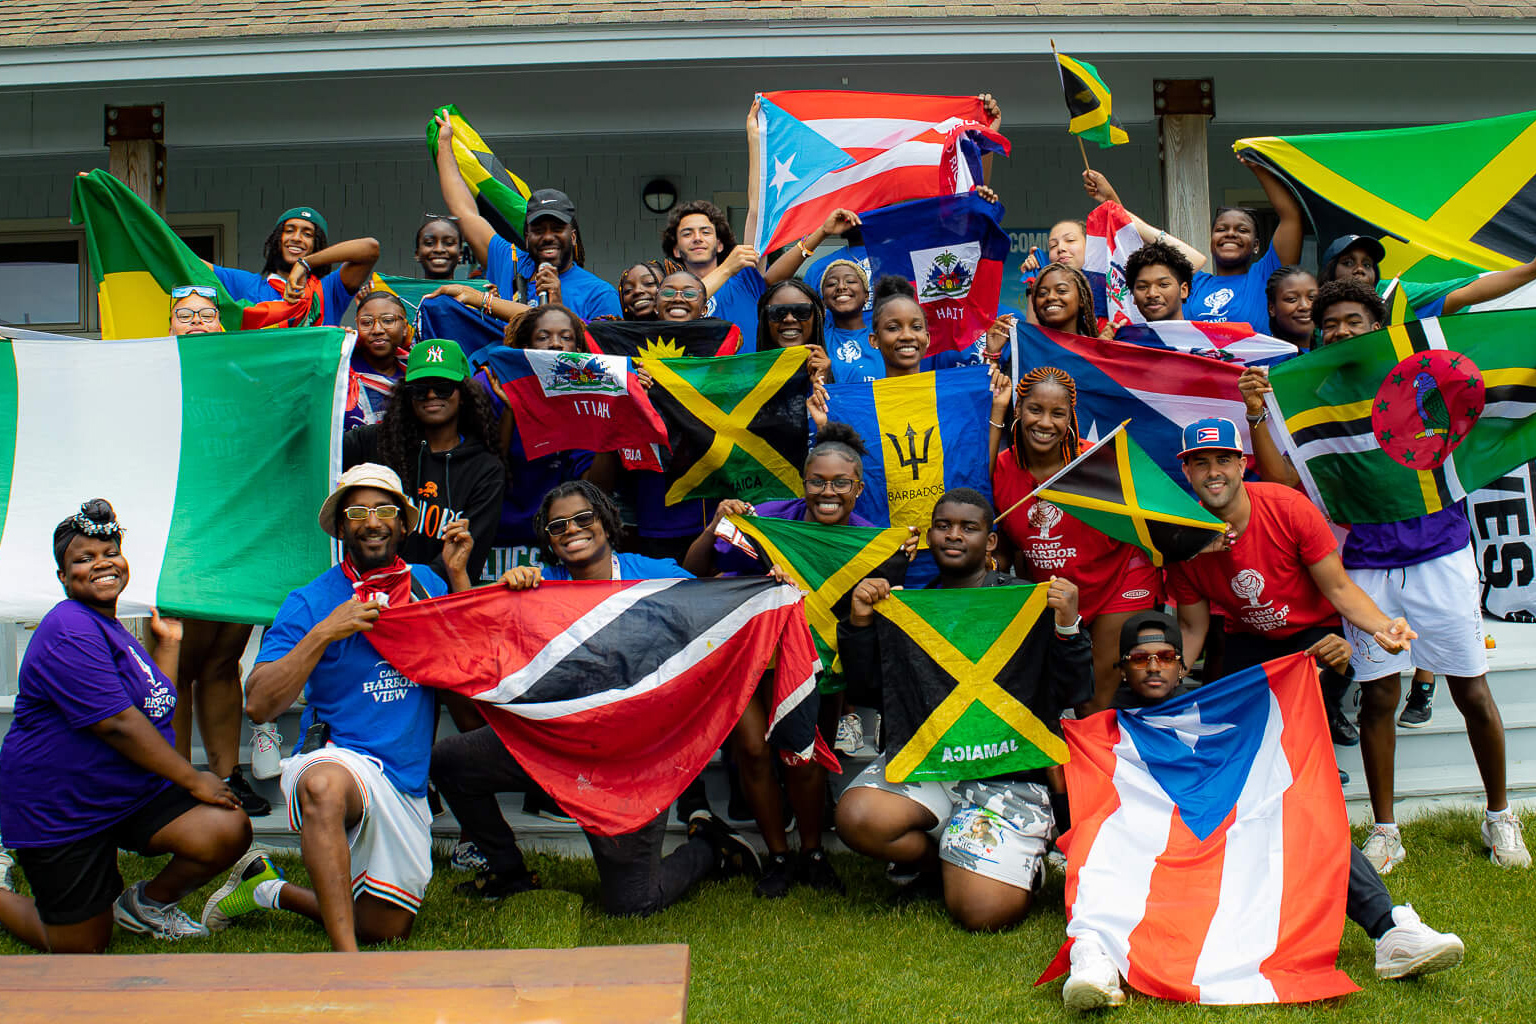 Group photo of teens and staff on the island holding flags